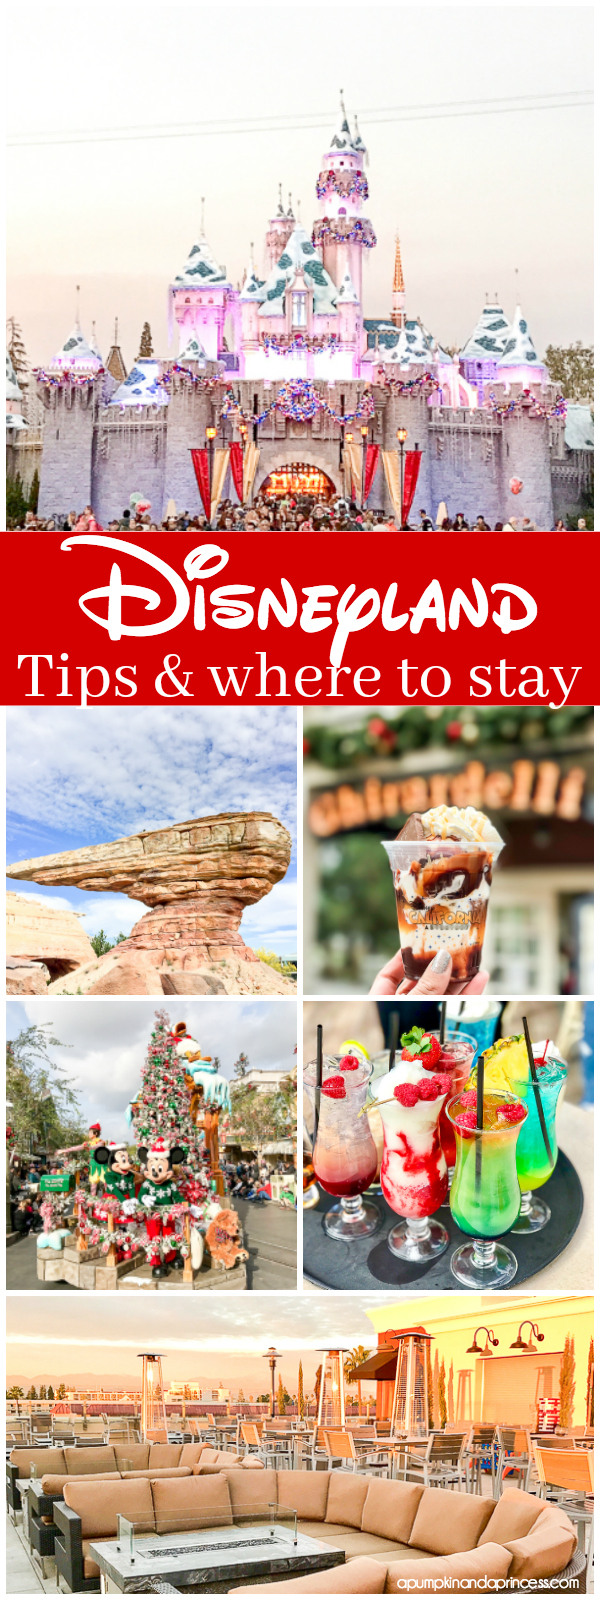 Disneyland Tips: where to stay, what to eat and tips for planning your Disneyland trip!